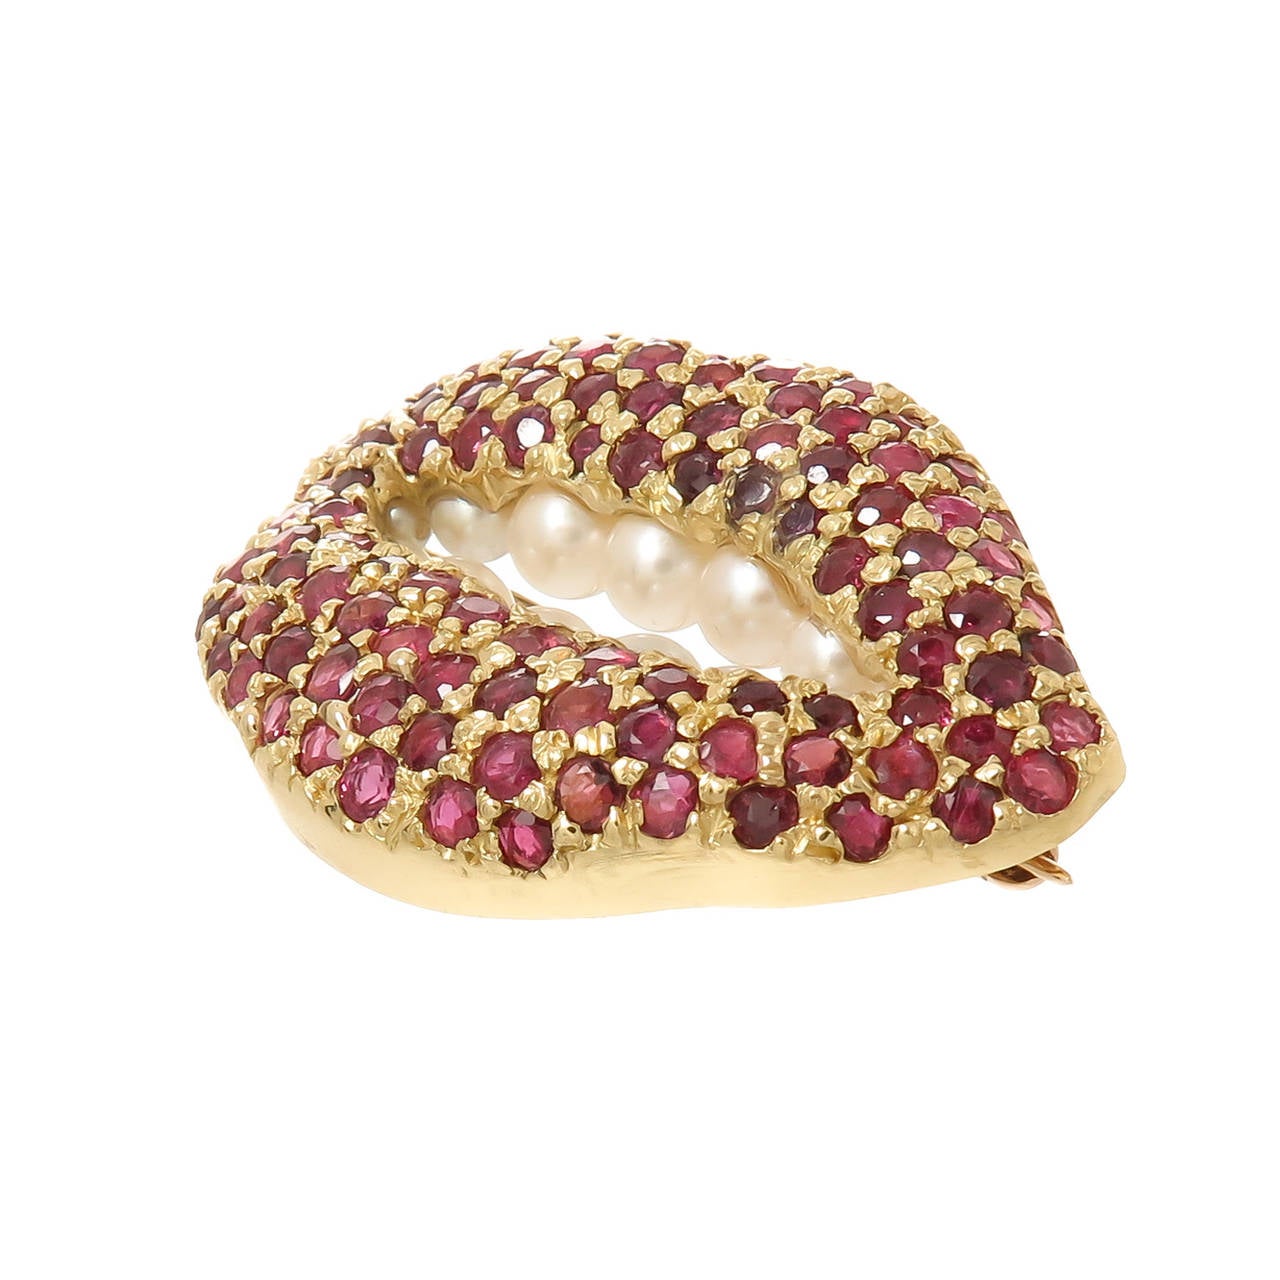 Circa 1980 18K Yellow Gold, Ruby and Pearl Lips Brooch by Salvador Dali and made by Henryk Kaston, set with just over 100 Round Rubies totaling approximately 4 to 5 Carats that are of fine matched deep Red Color, further set with 13 Cultured Pearls